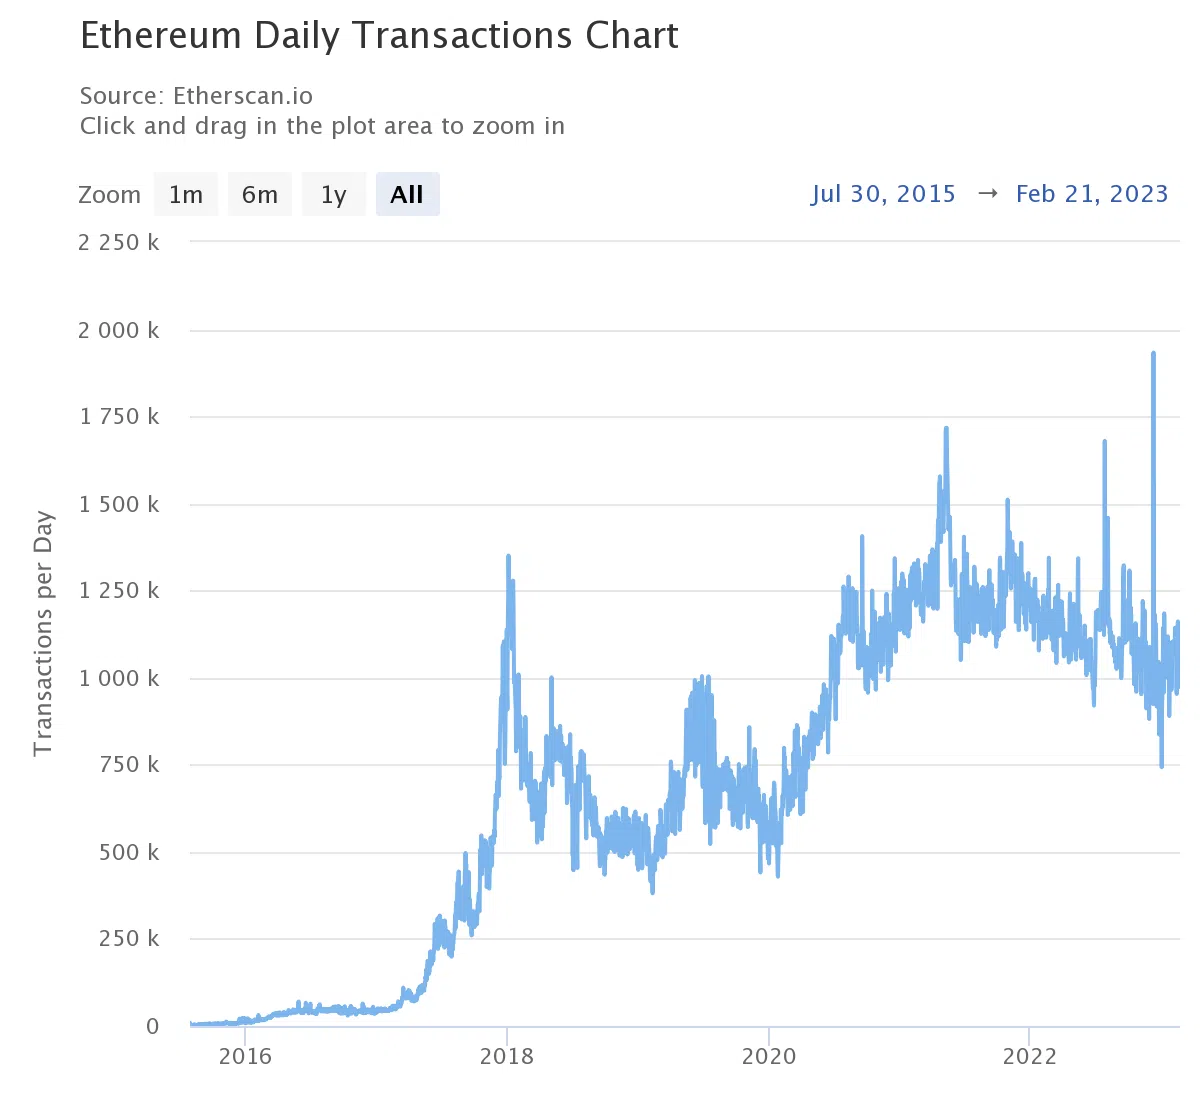 Ethereum daily transactions chart